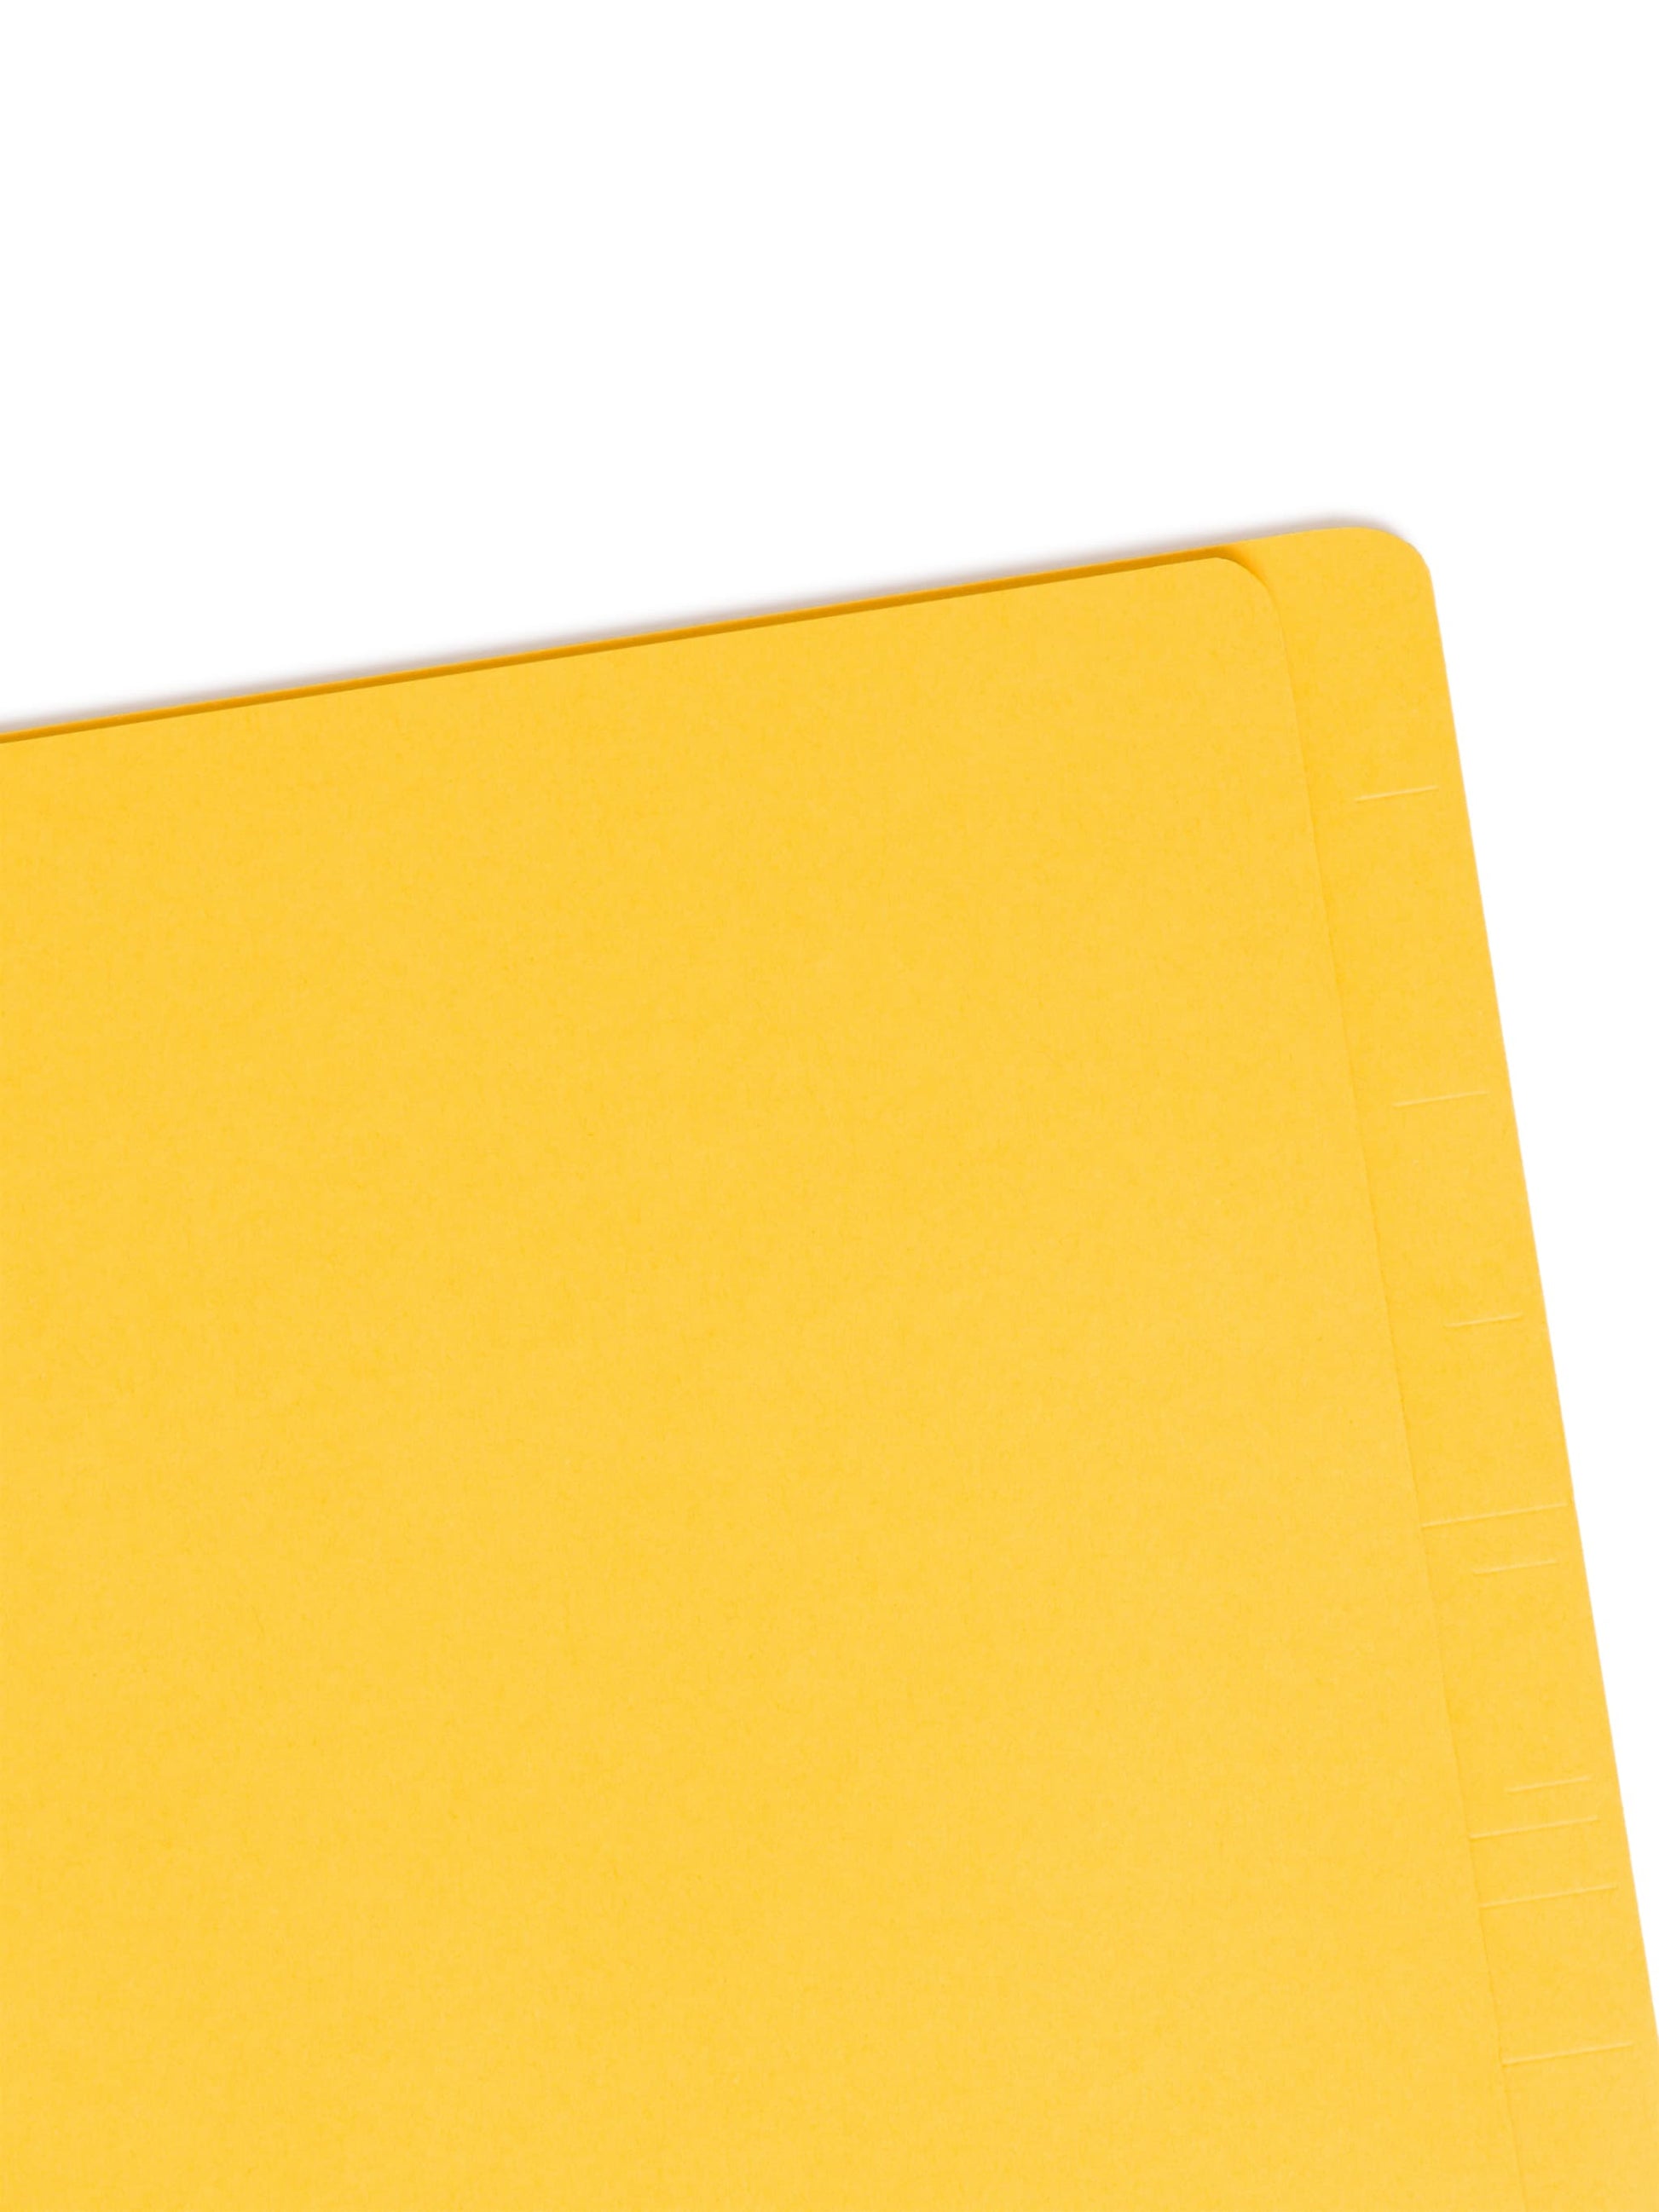 SafeSHIELD® Pressboard End Tab Classification File Folders, Straight-Cut Tab, 2 inch Expansion, 2 Divider, Yellow Color, Legal Size, Set of 0, 30086486297890